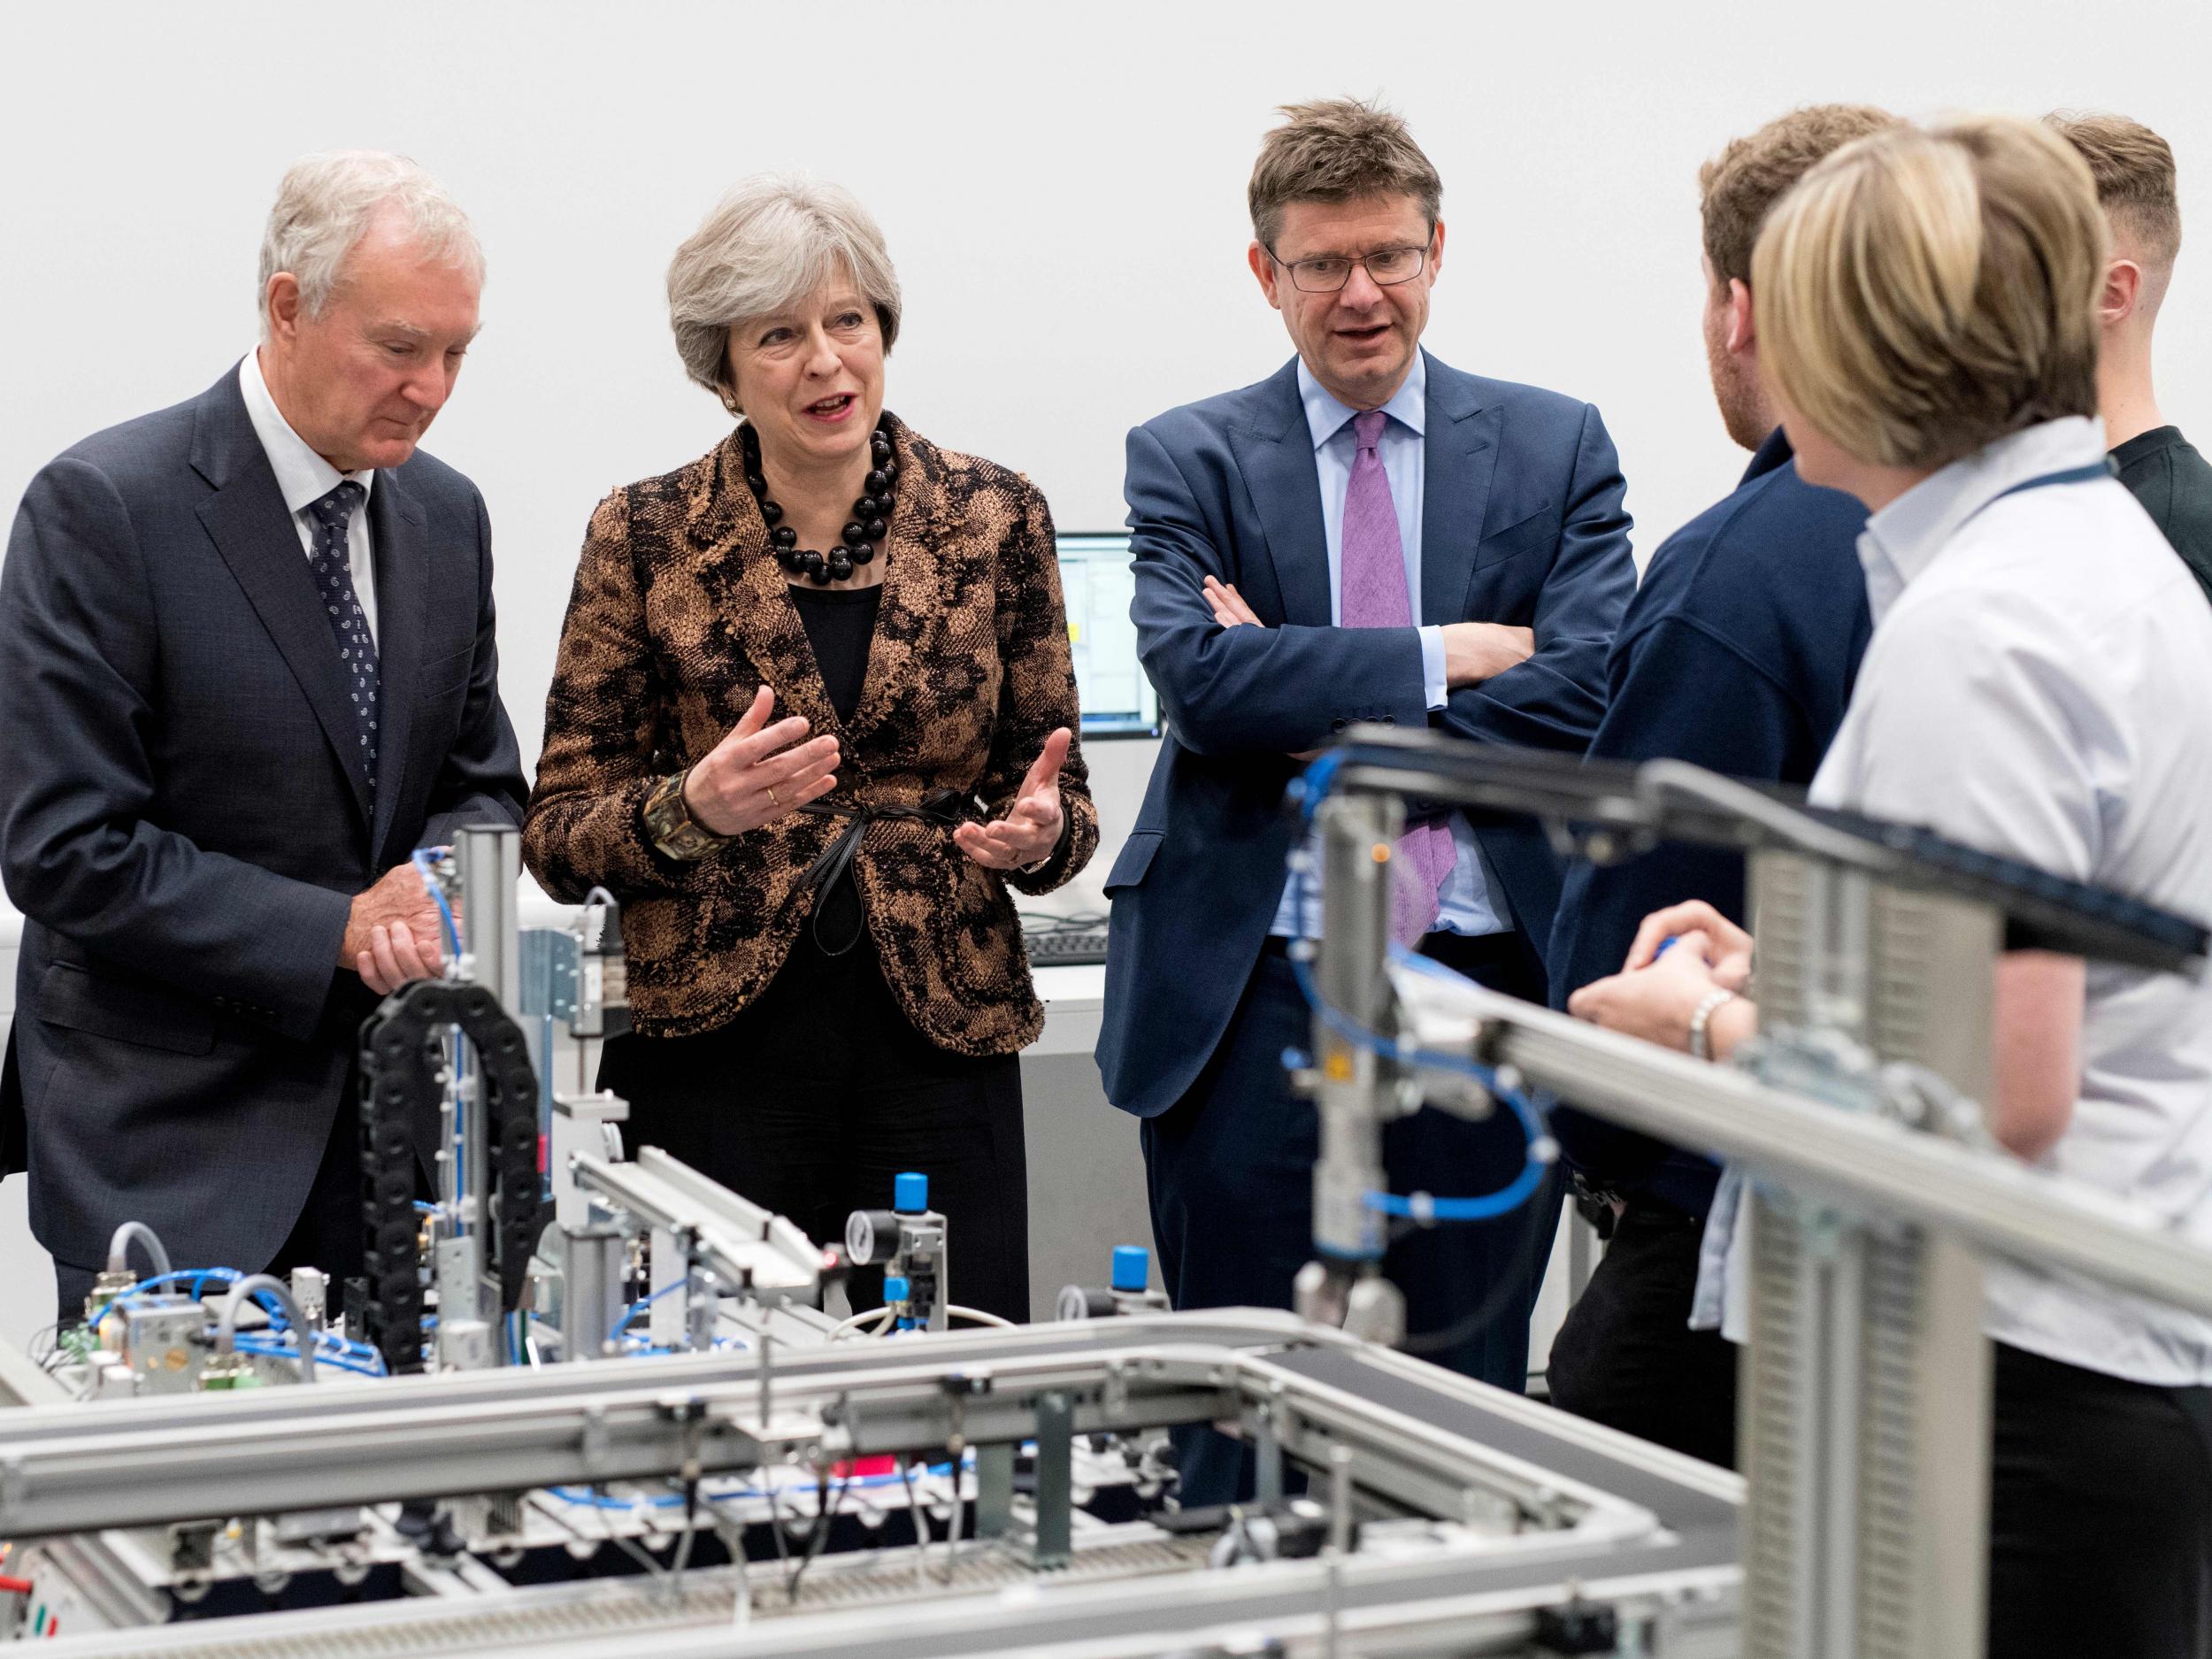 Theresa May and business secretary Greg Clark's unveiling of the Industrial Strategy was overshadowed by news of a royal wedding